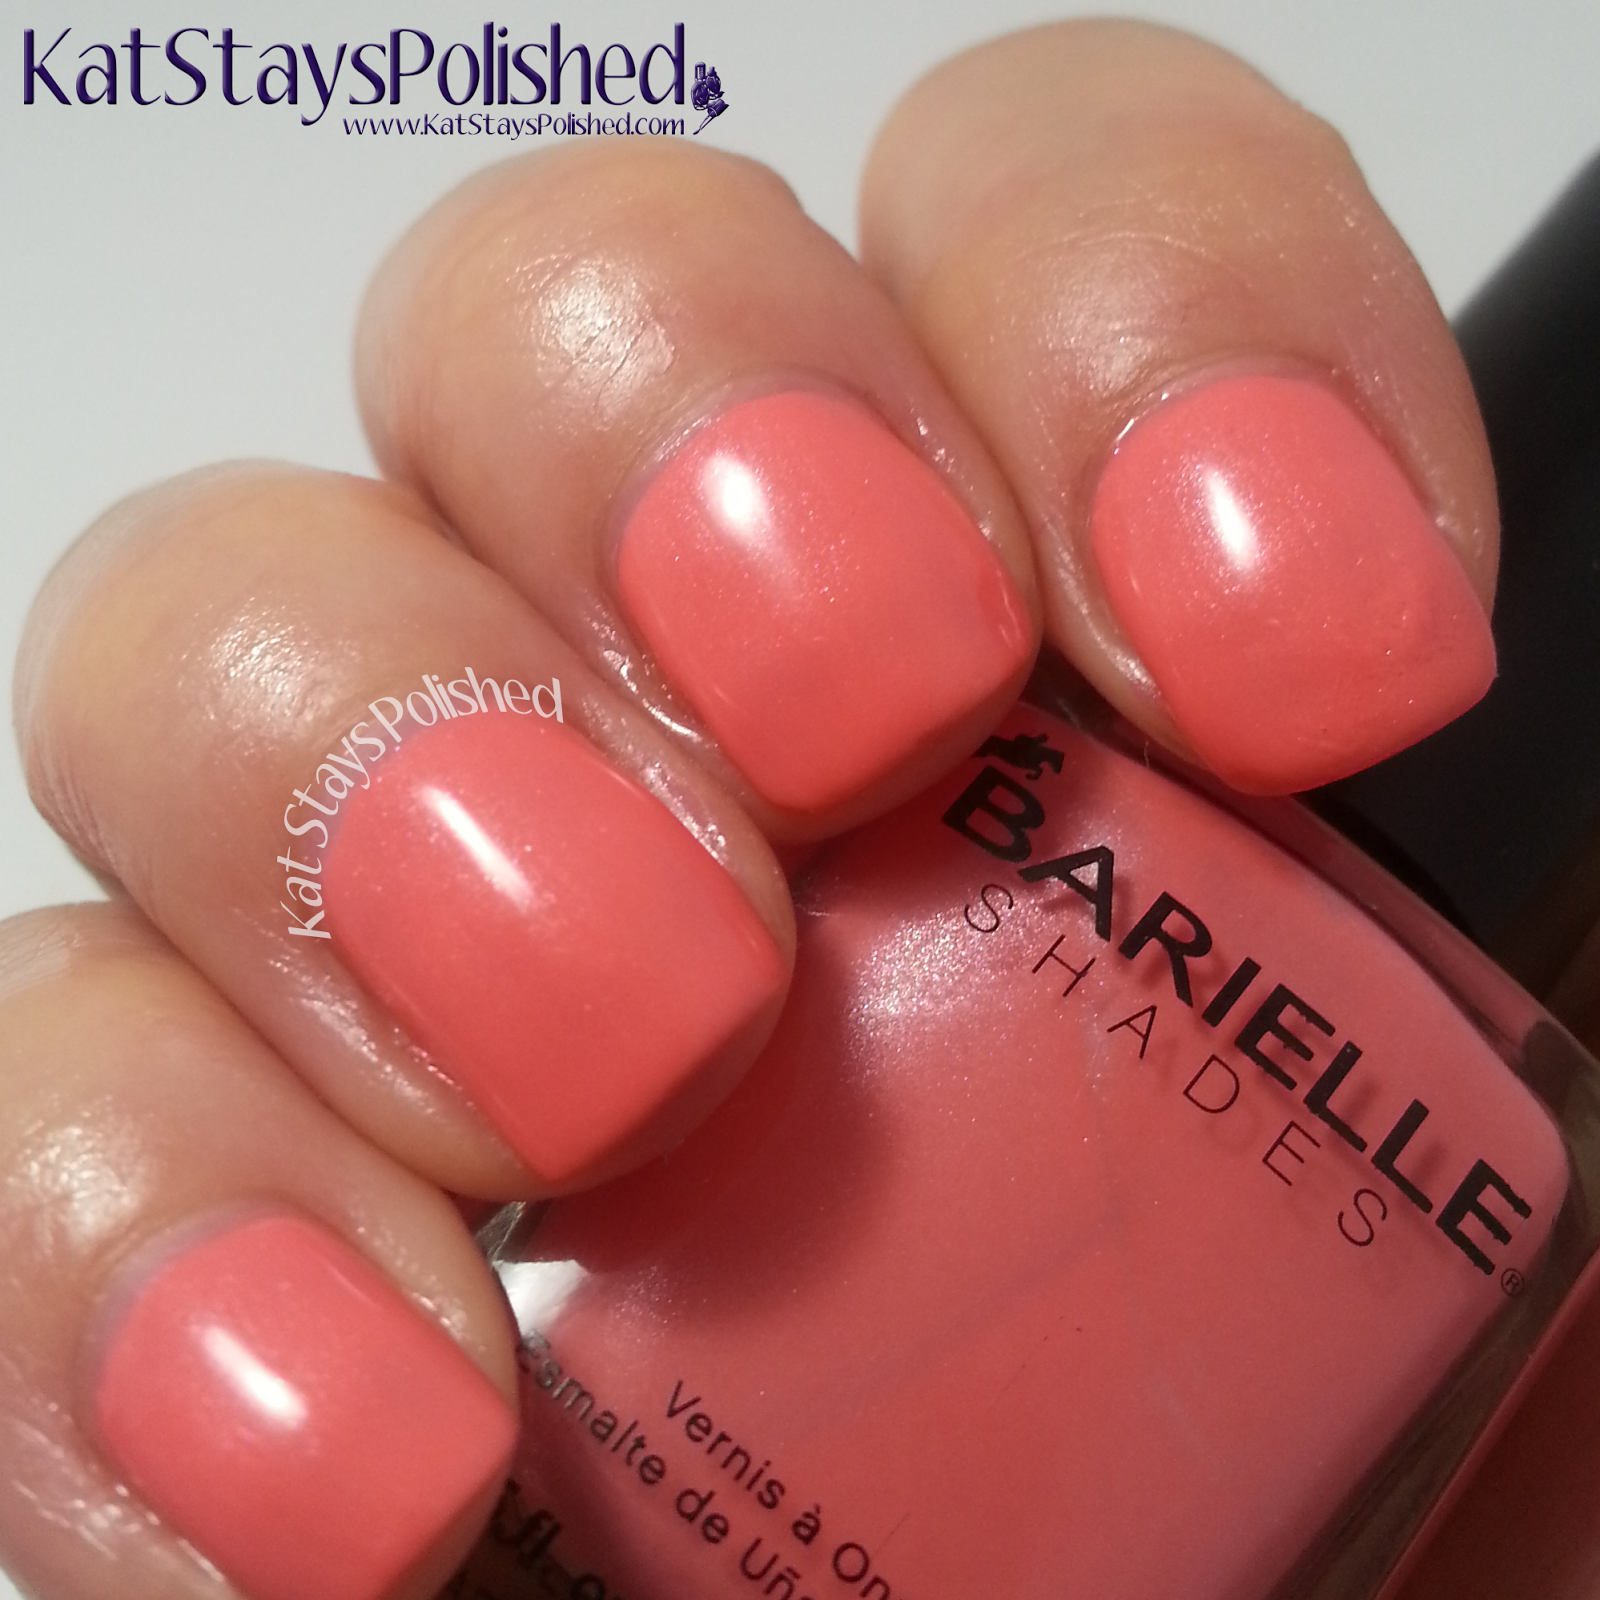 Barielle Keys Collection - Summer 2014 - Topless in St Tropez | Kat Stays Polished